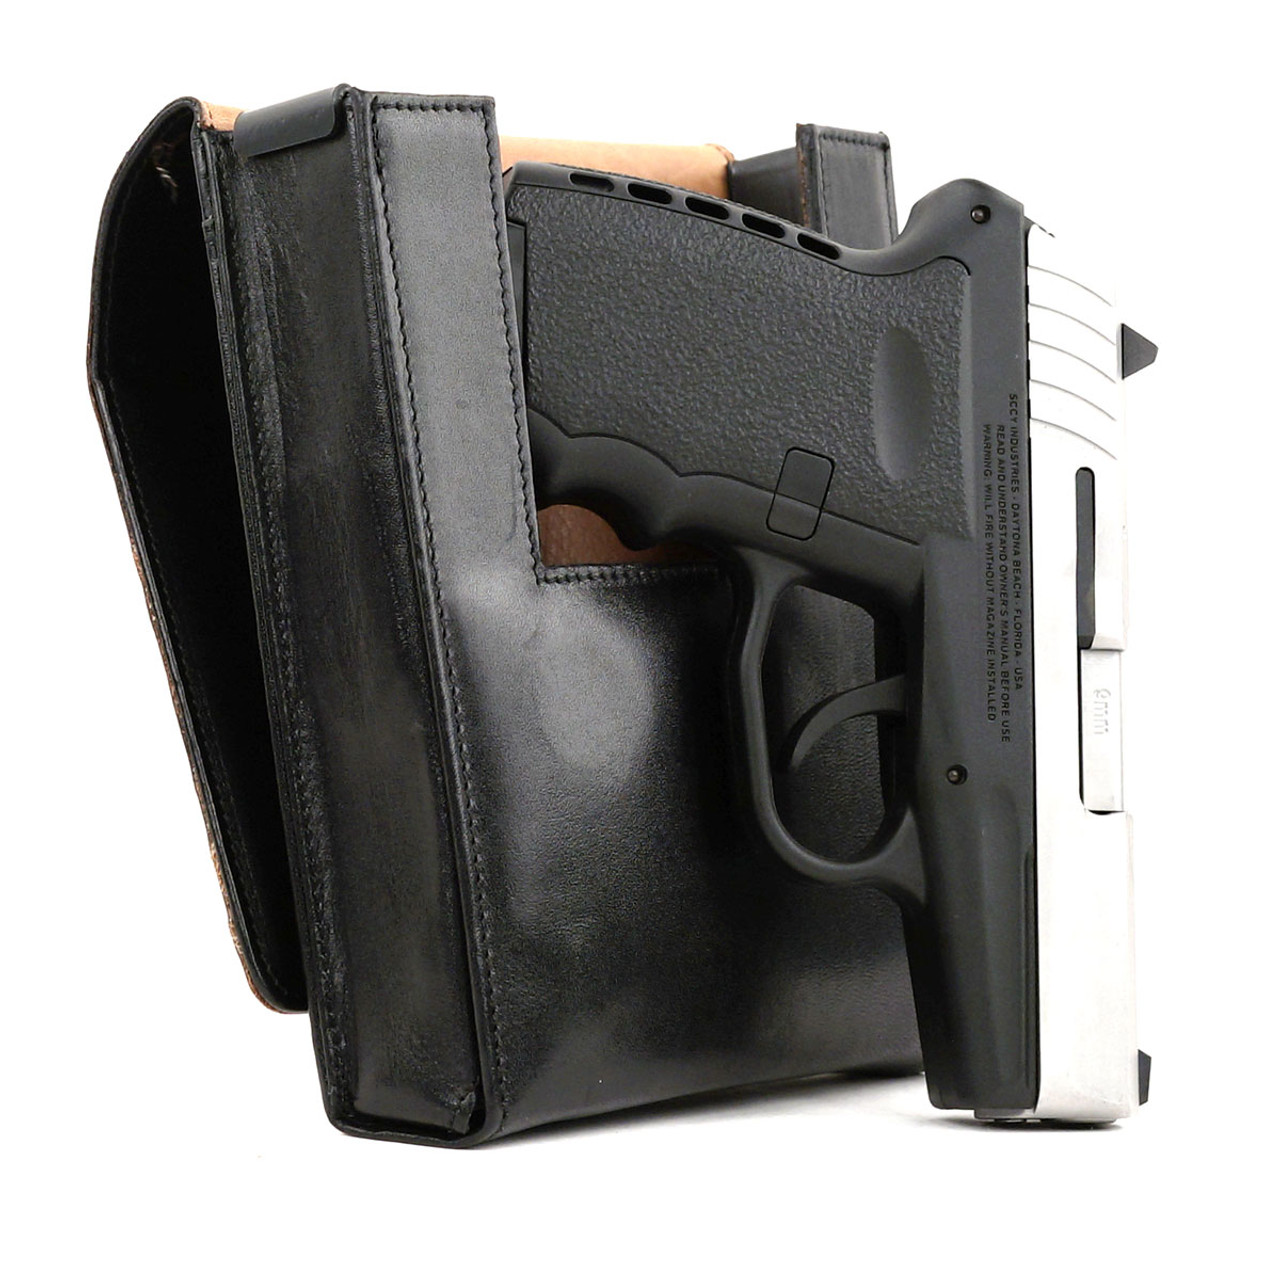 iwb magazine holster Kel tec p11 sccy cpx1 cpx2 pistol black leather pouch 